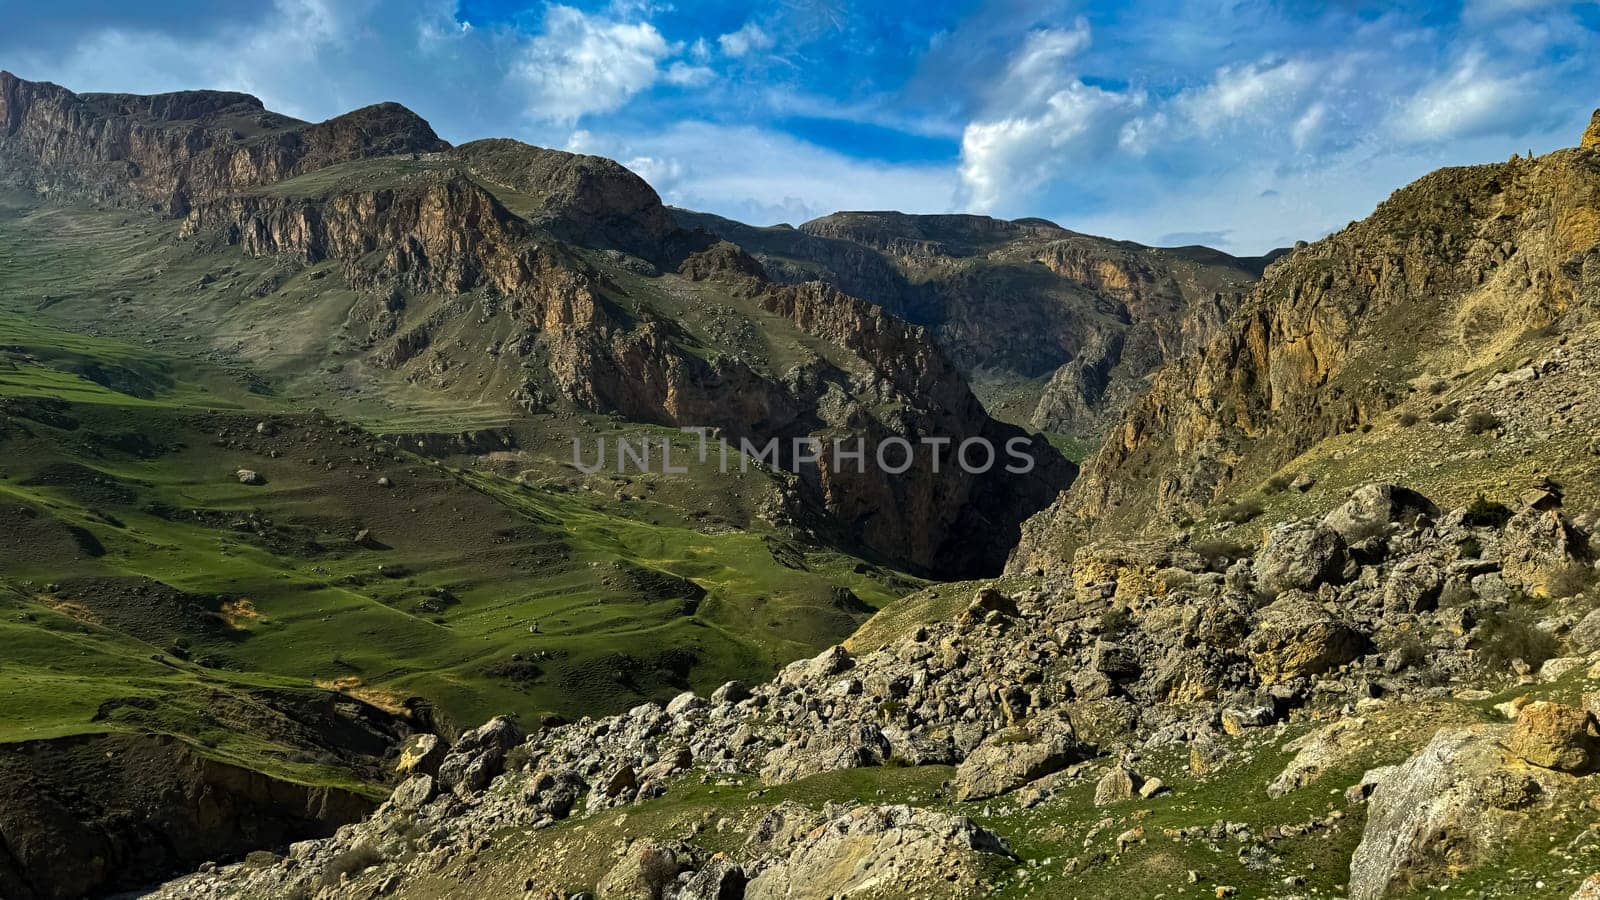 Mountain landscape with green valleys, rugged cliffs under blue sky with clouds. For advertising banner or post card of outdoor adventure and travel themes. High quality photo